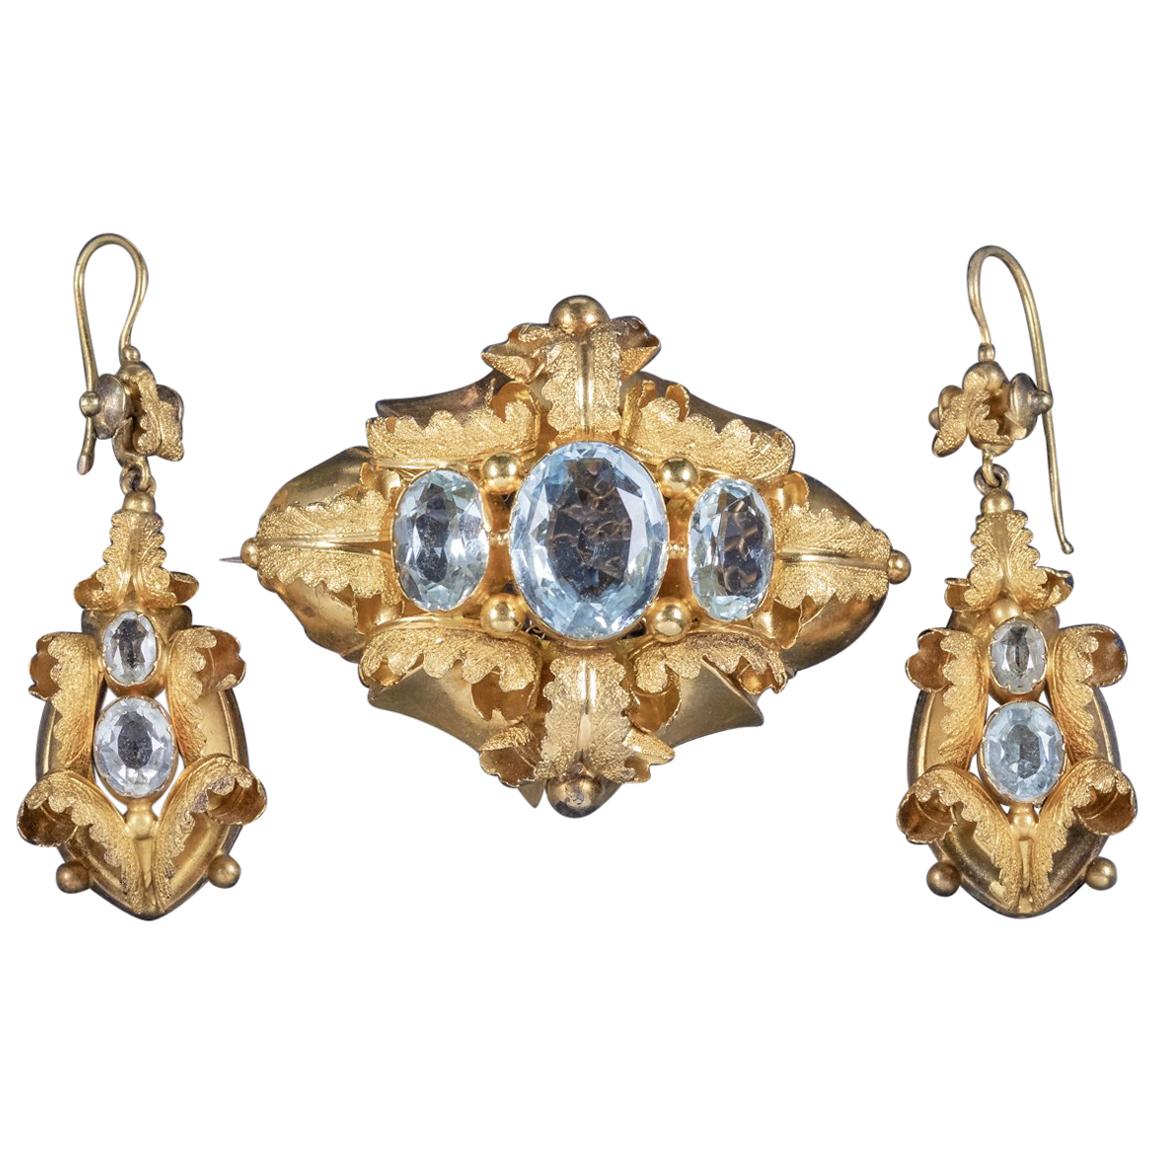 Antique Victorian 18ct Gold Aquamarine Circa 1860 Boxed Brooch And Earrings Set For Sale